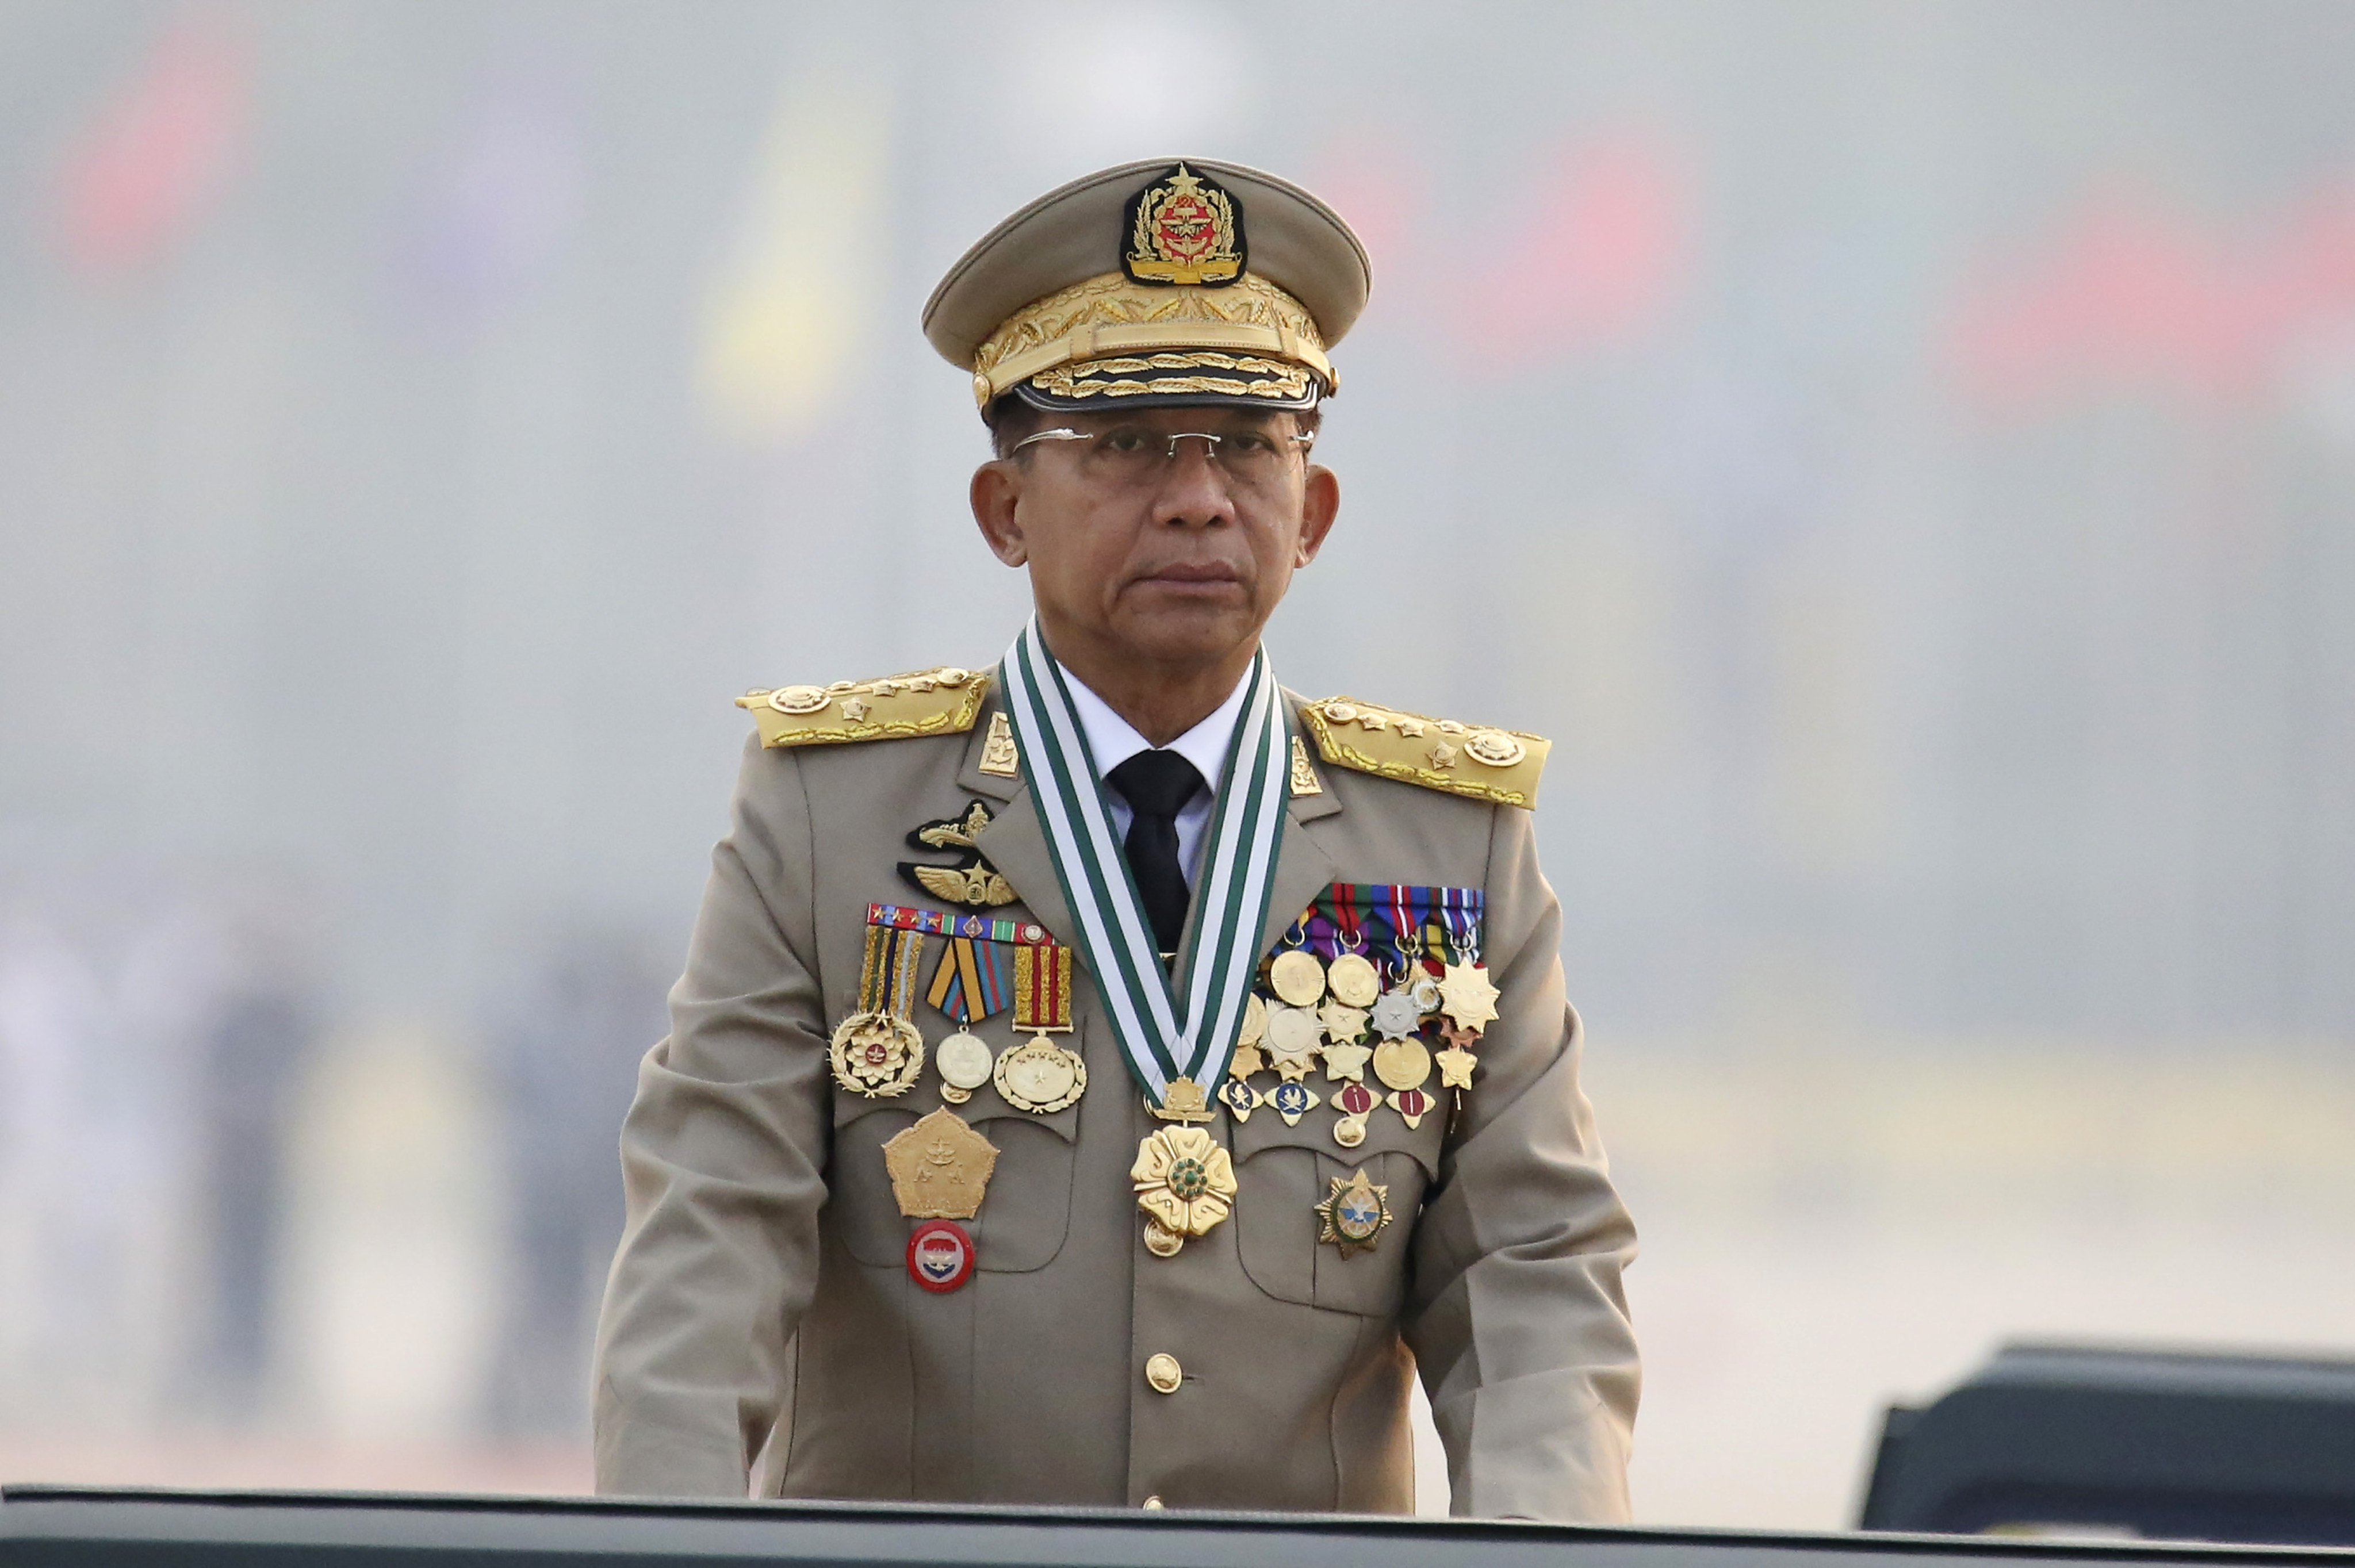 Myanmar’s junta chief, Senior General Min Aung Hlaing, is pictured in Naypyidaw on March 27, 2021. Photo: AP